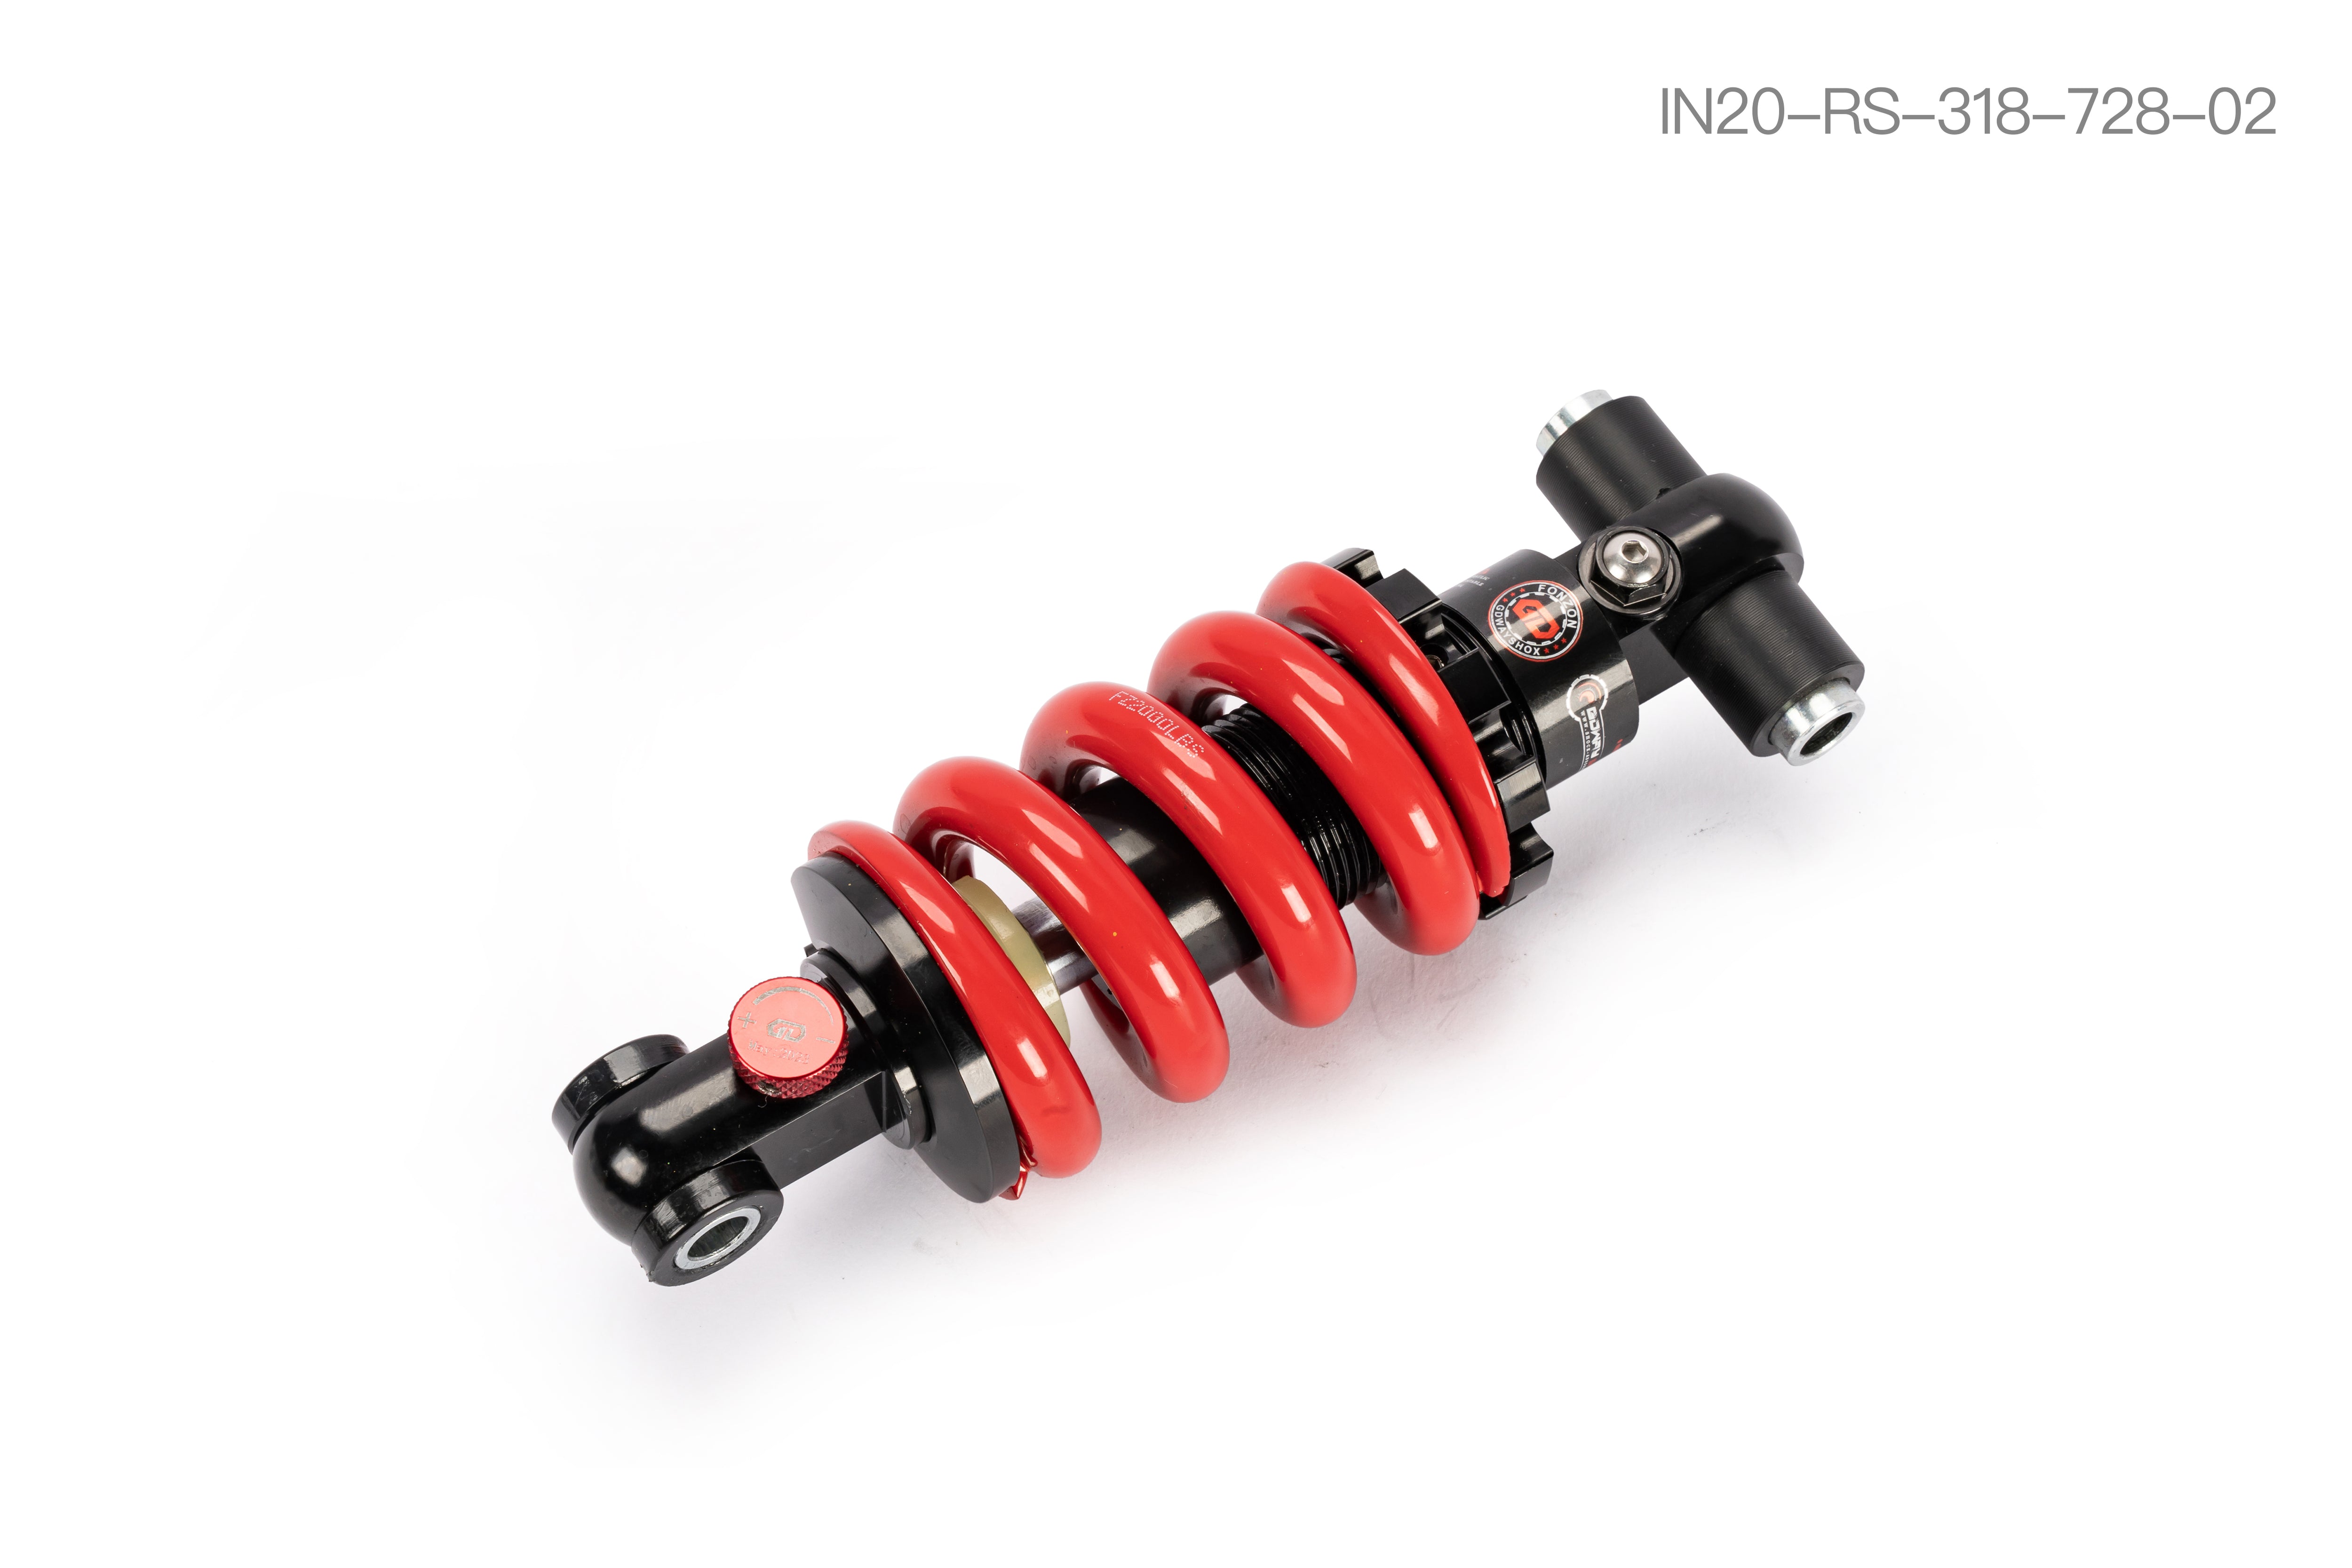 Damping Adjustable Rear Suspension for Inmotion RS